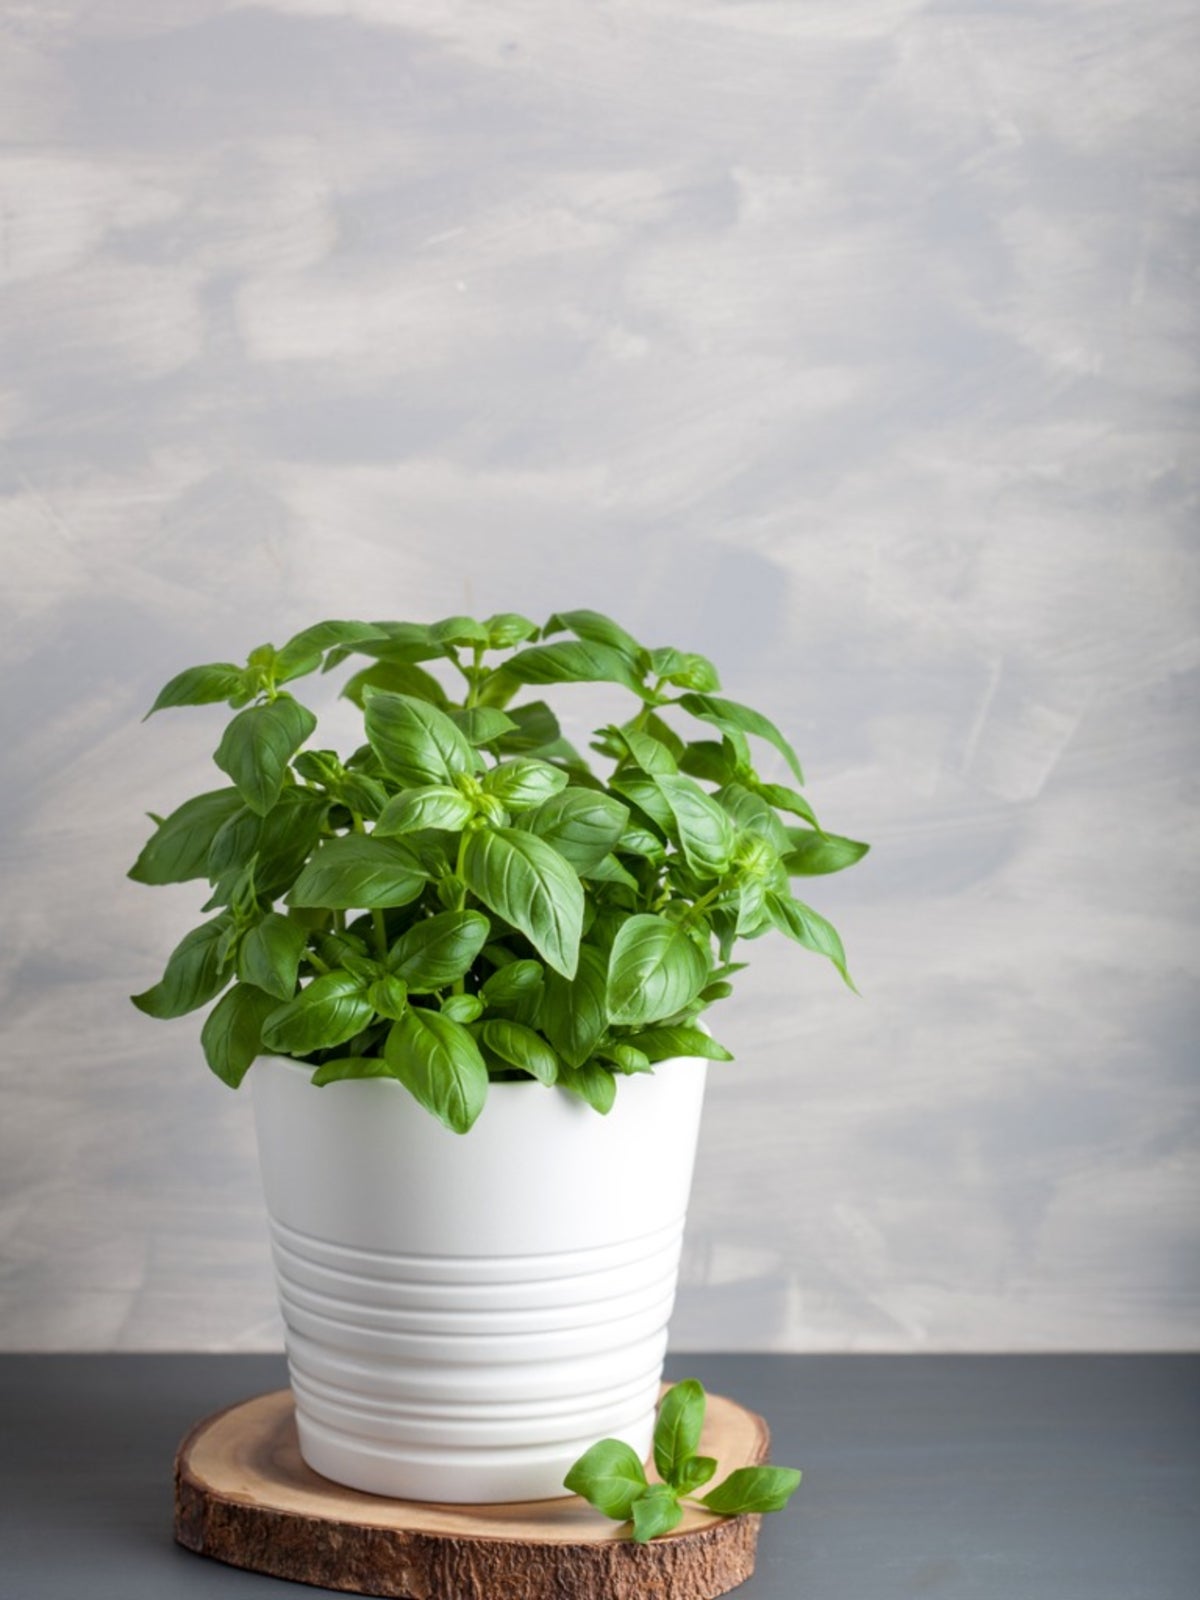 How hard is it to take care of basil plant